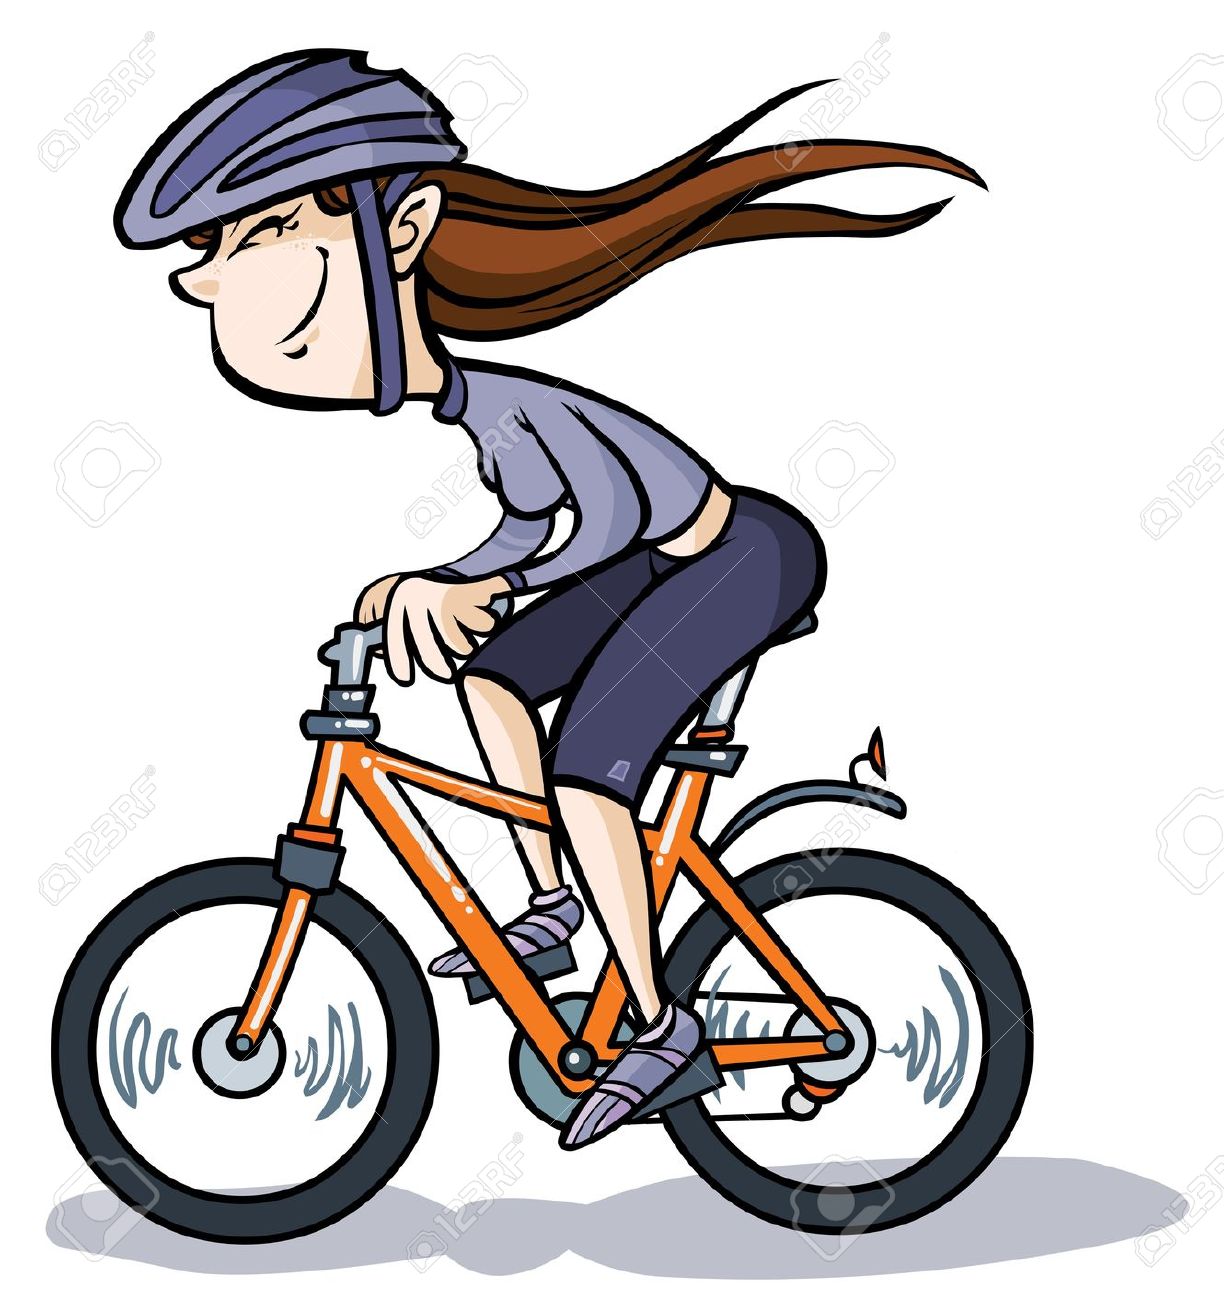 bicycle clipart bicylce